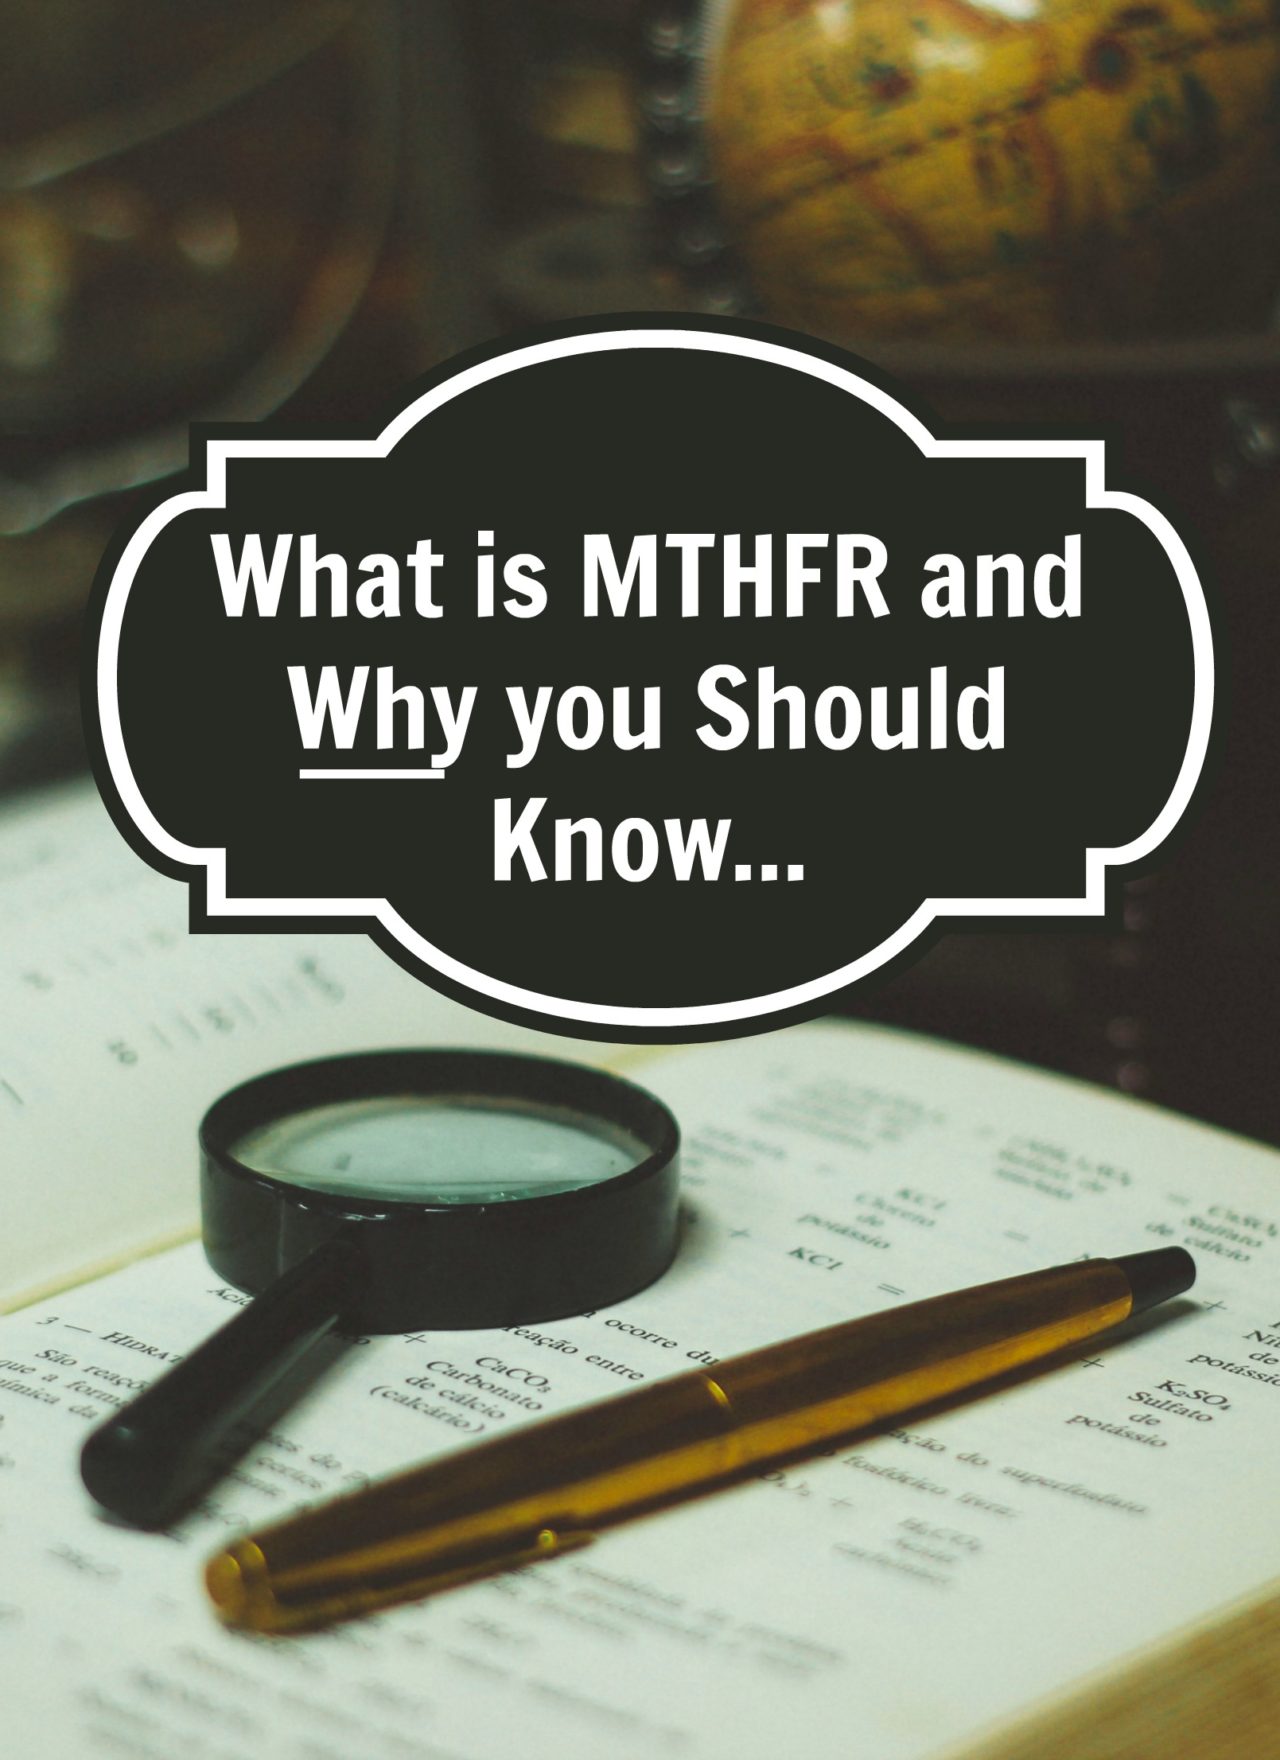 What is MTHFR and Why is it Good to Know